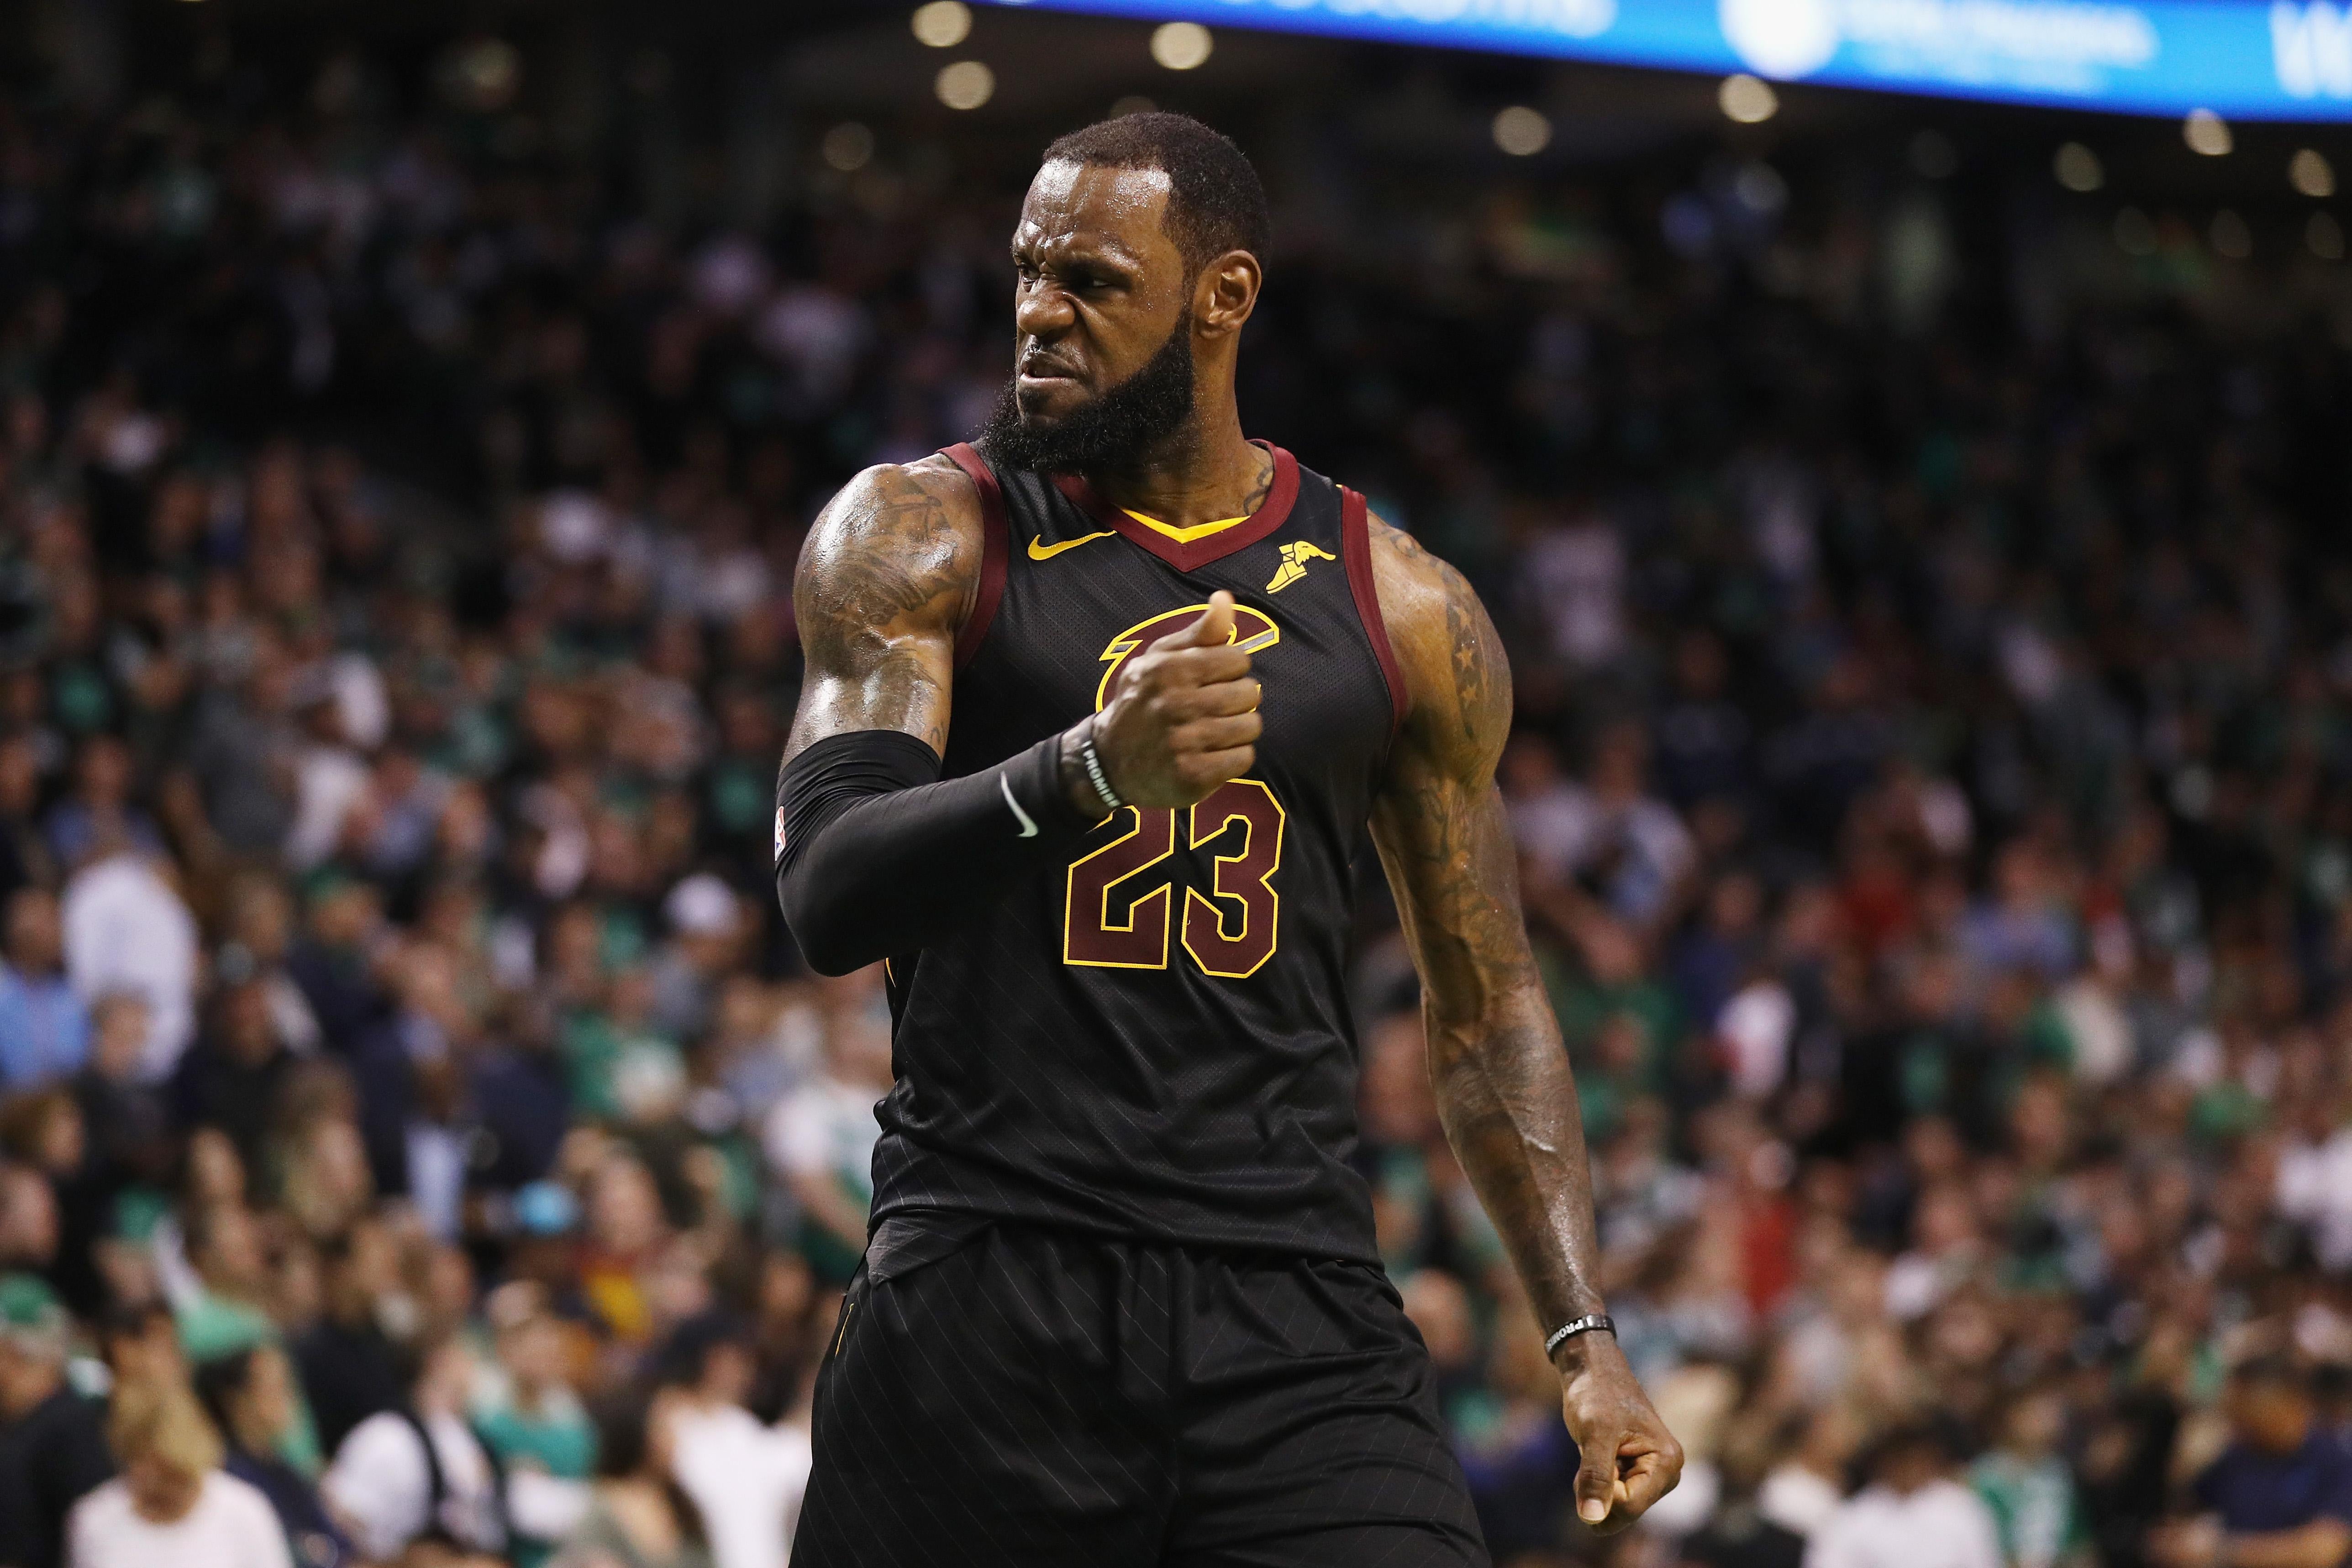 Cavs news: Only 8 players remain from 2018 LeBron James-led Finals team